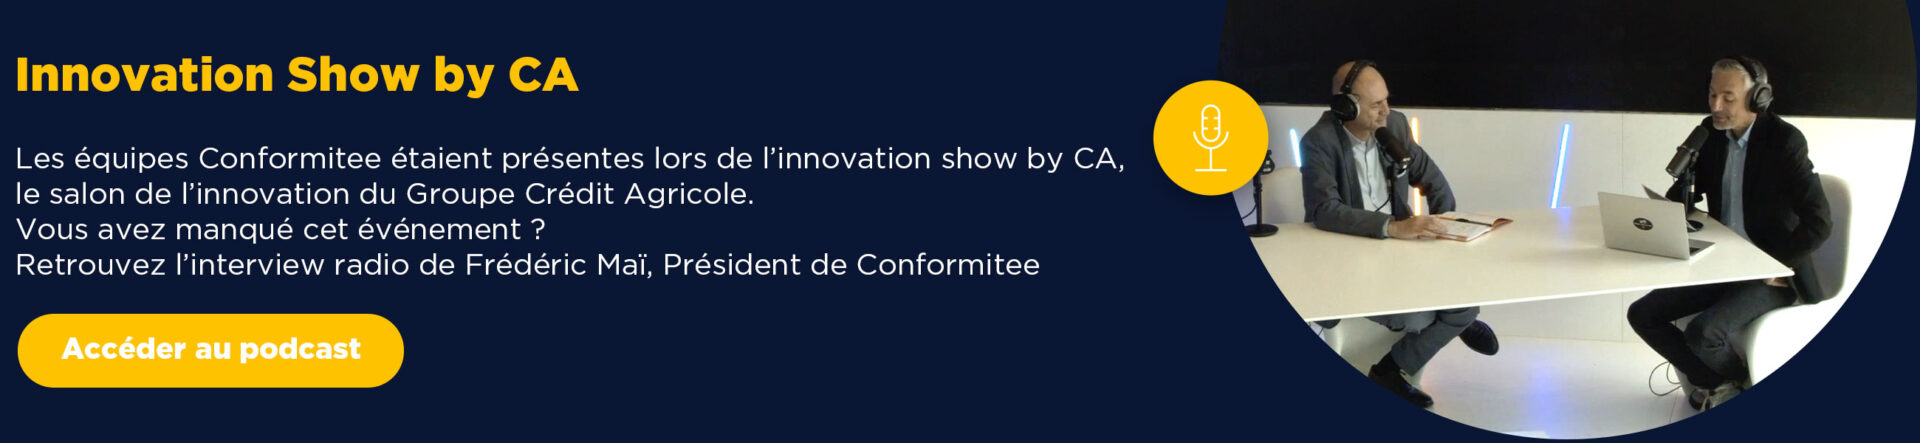 Innovation Show by CA